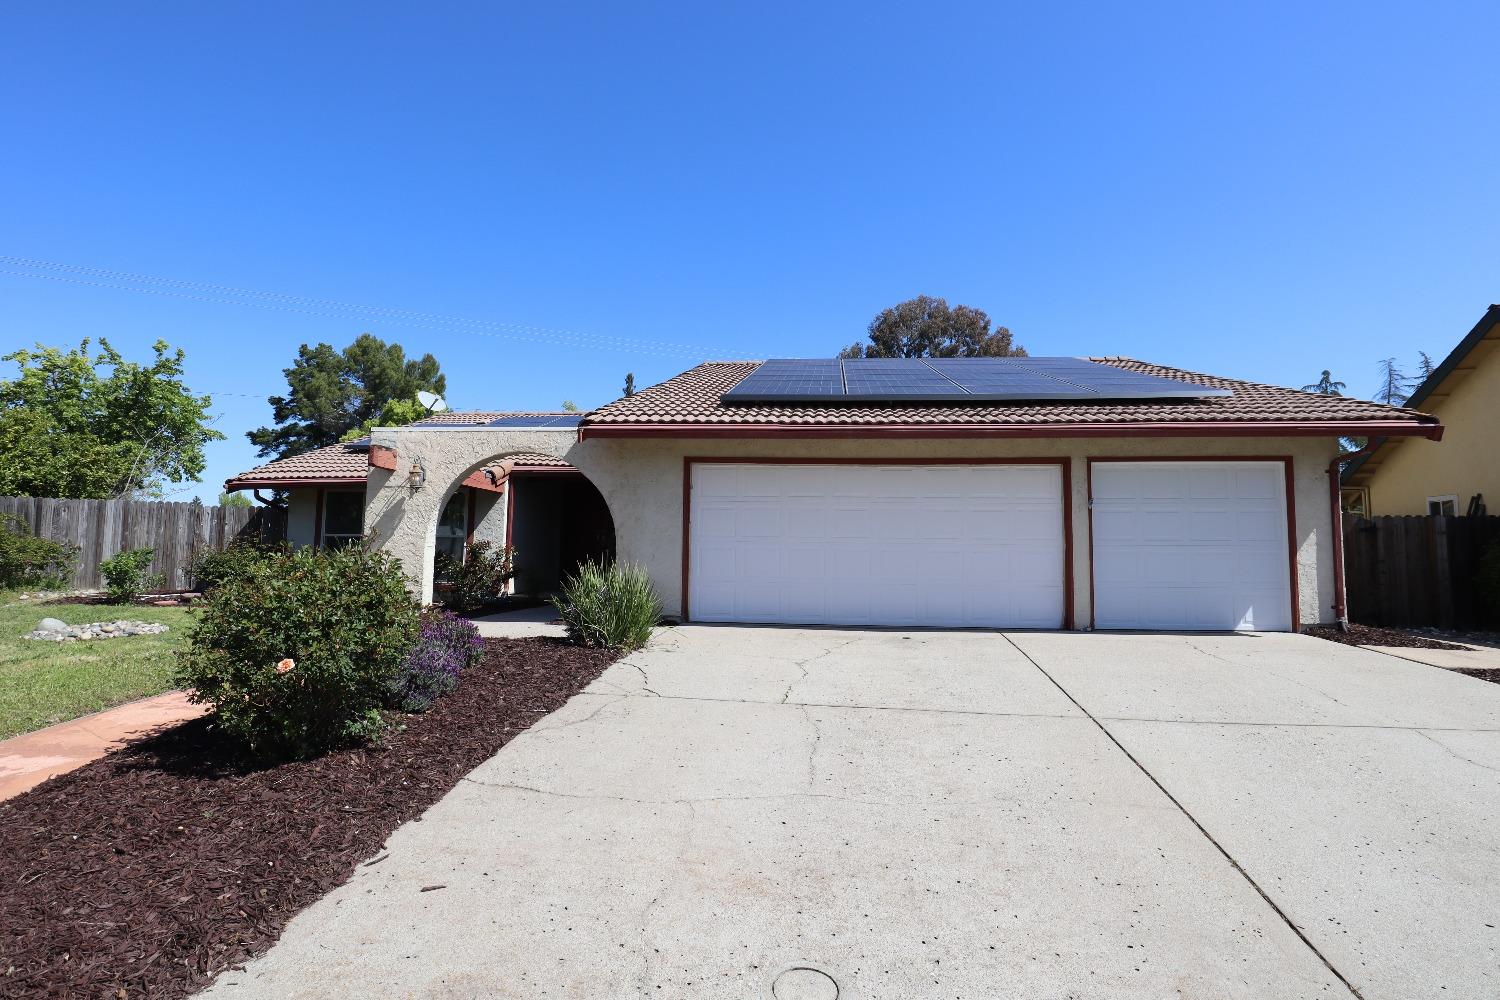 Photo of 1204 Hampshire Ct in Roseville, CA